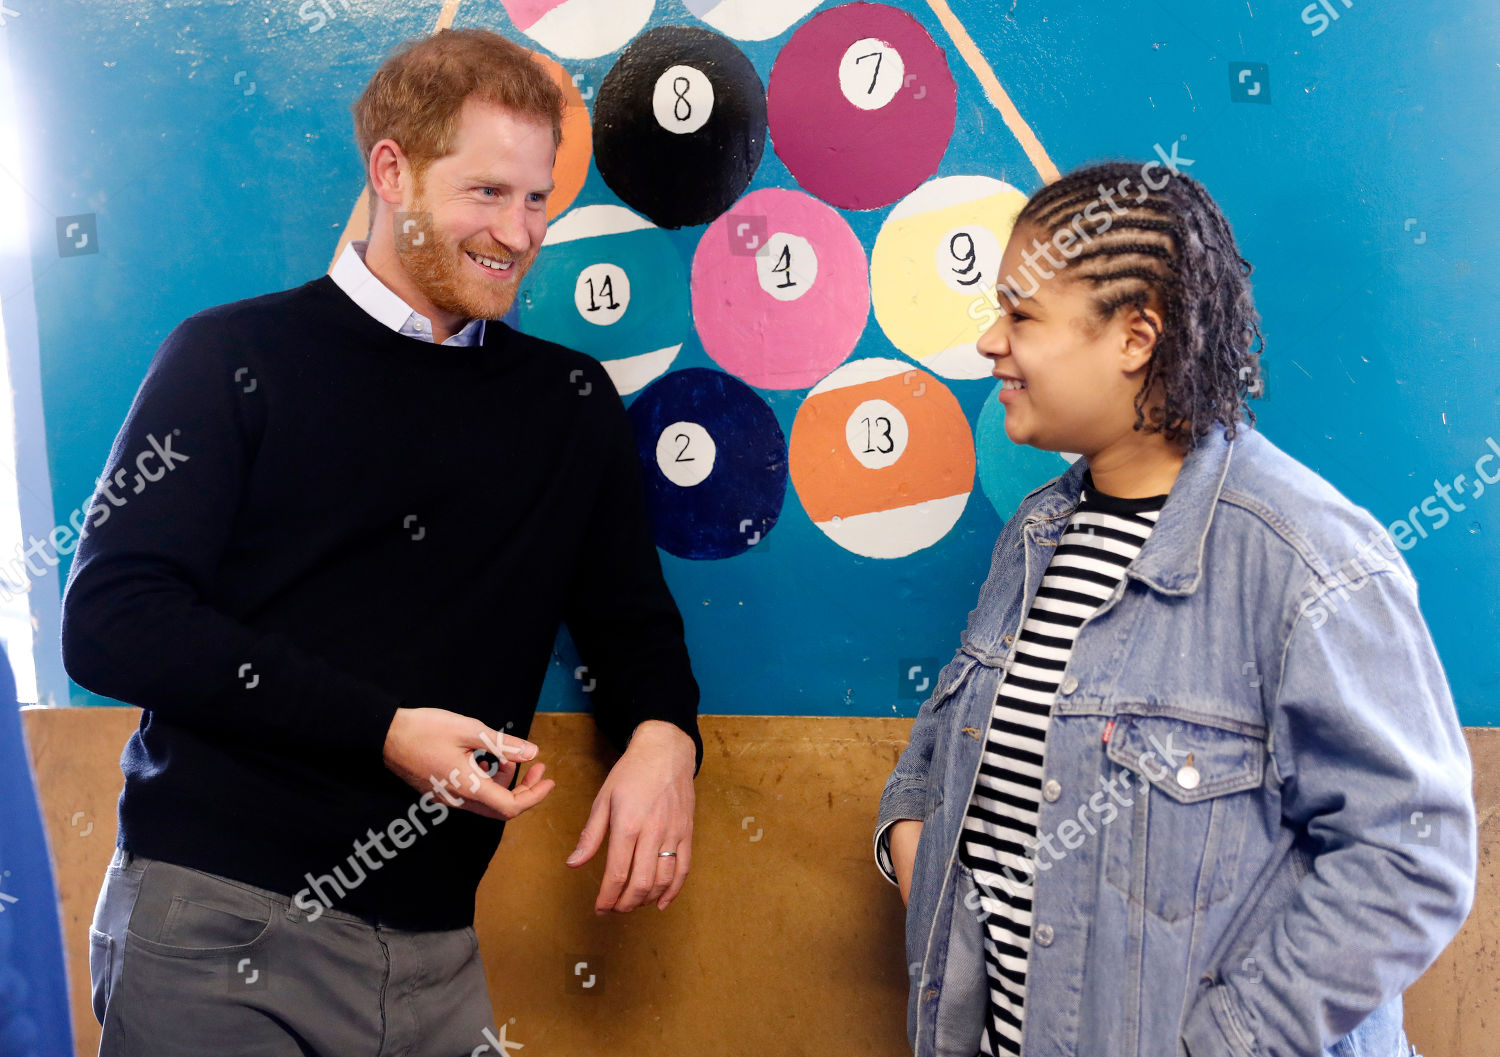 prince-harry-visit-to-fit-and-fed-half-term-initiative-streatham-london-uk-shutterstock-editorial-10110713m.jpg